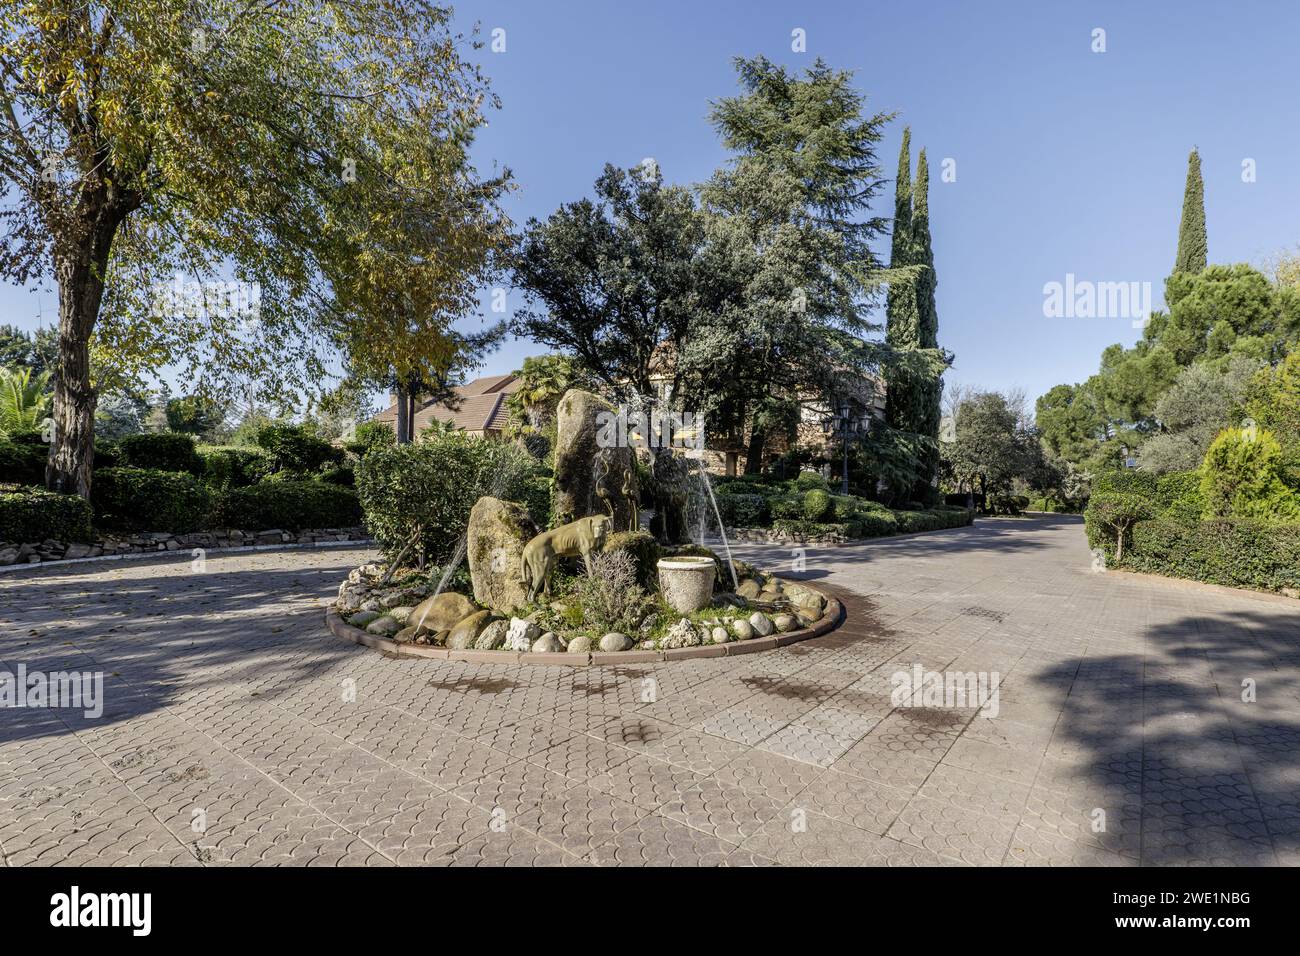 A fountain in the gazebo of a paved walk within an extensive property with a single-family home Stock Photo